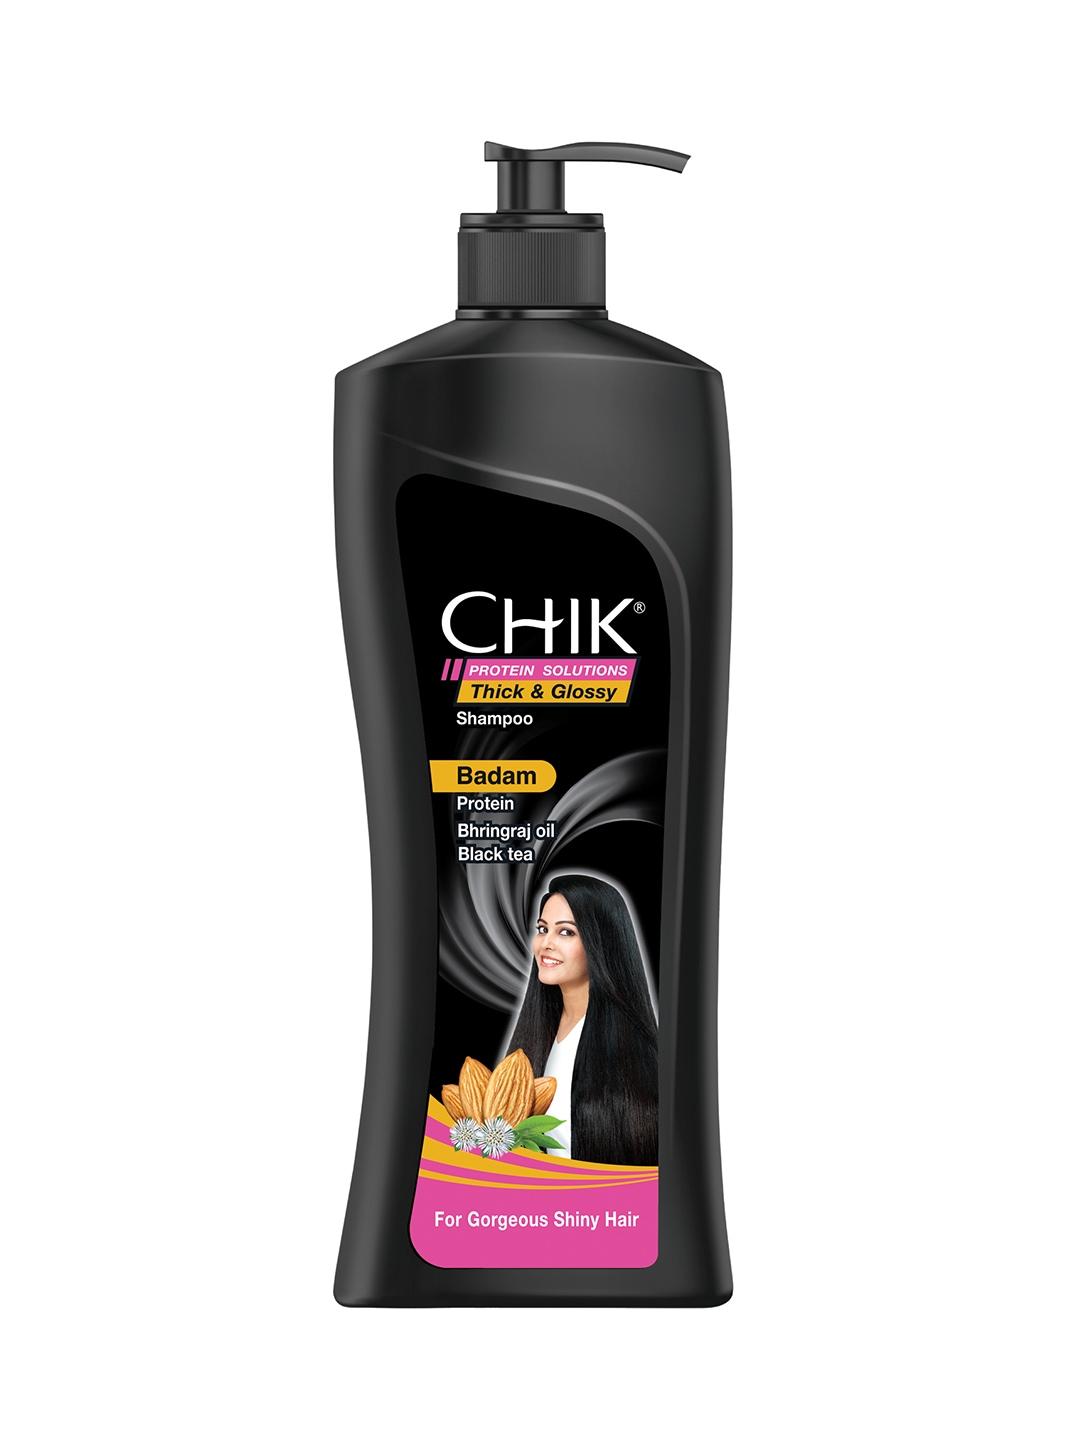 Chik Protein Solutions Thick & Glossy Shampoo with Badam & Bhringraj Oil - 340 ml